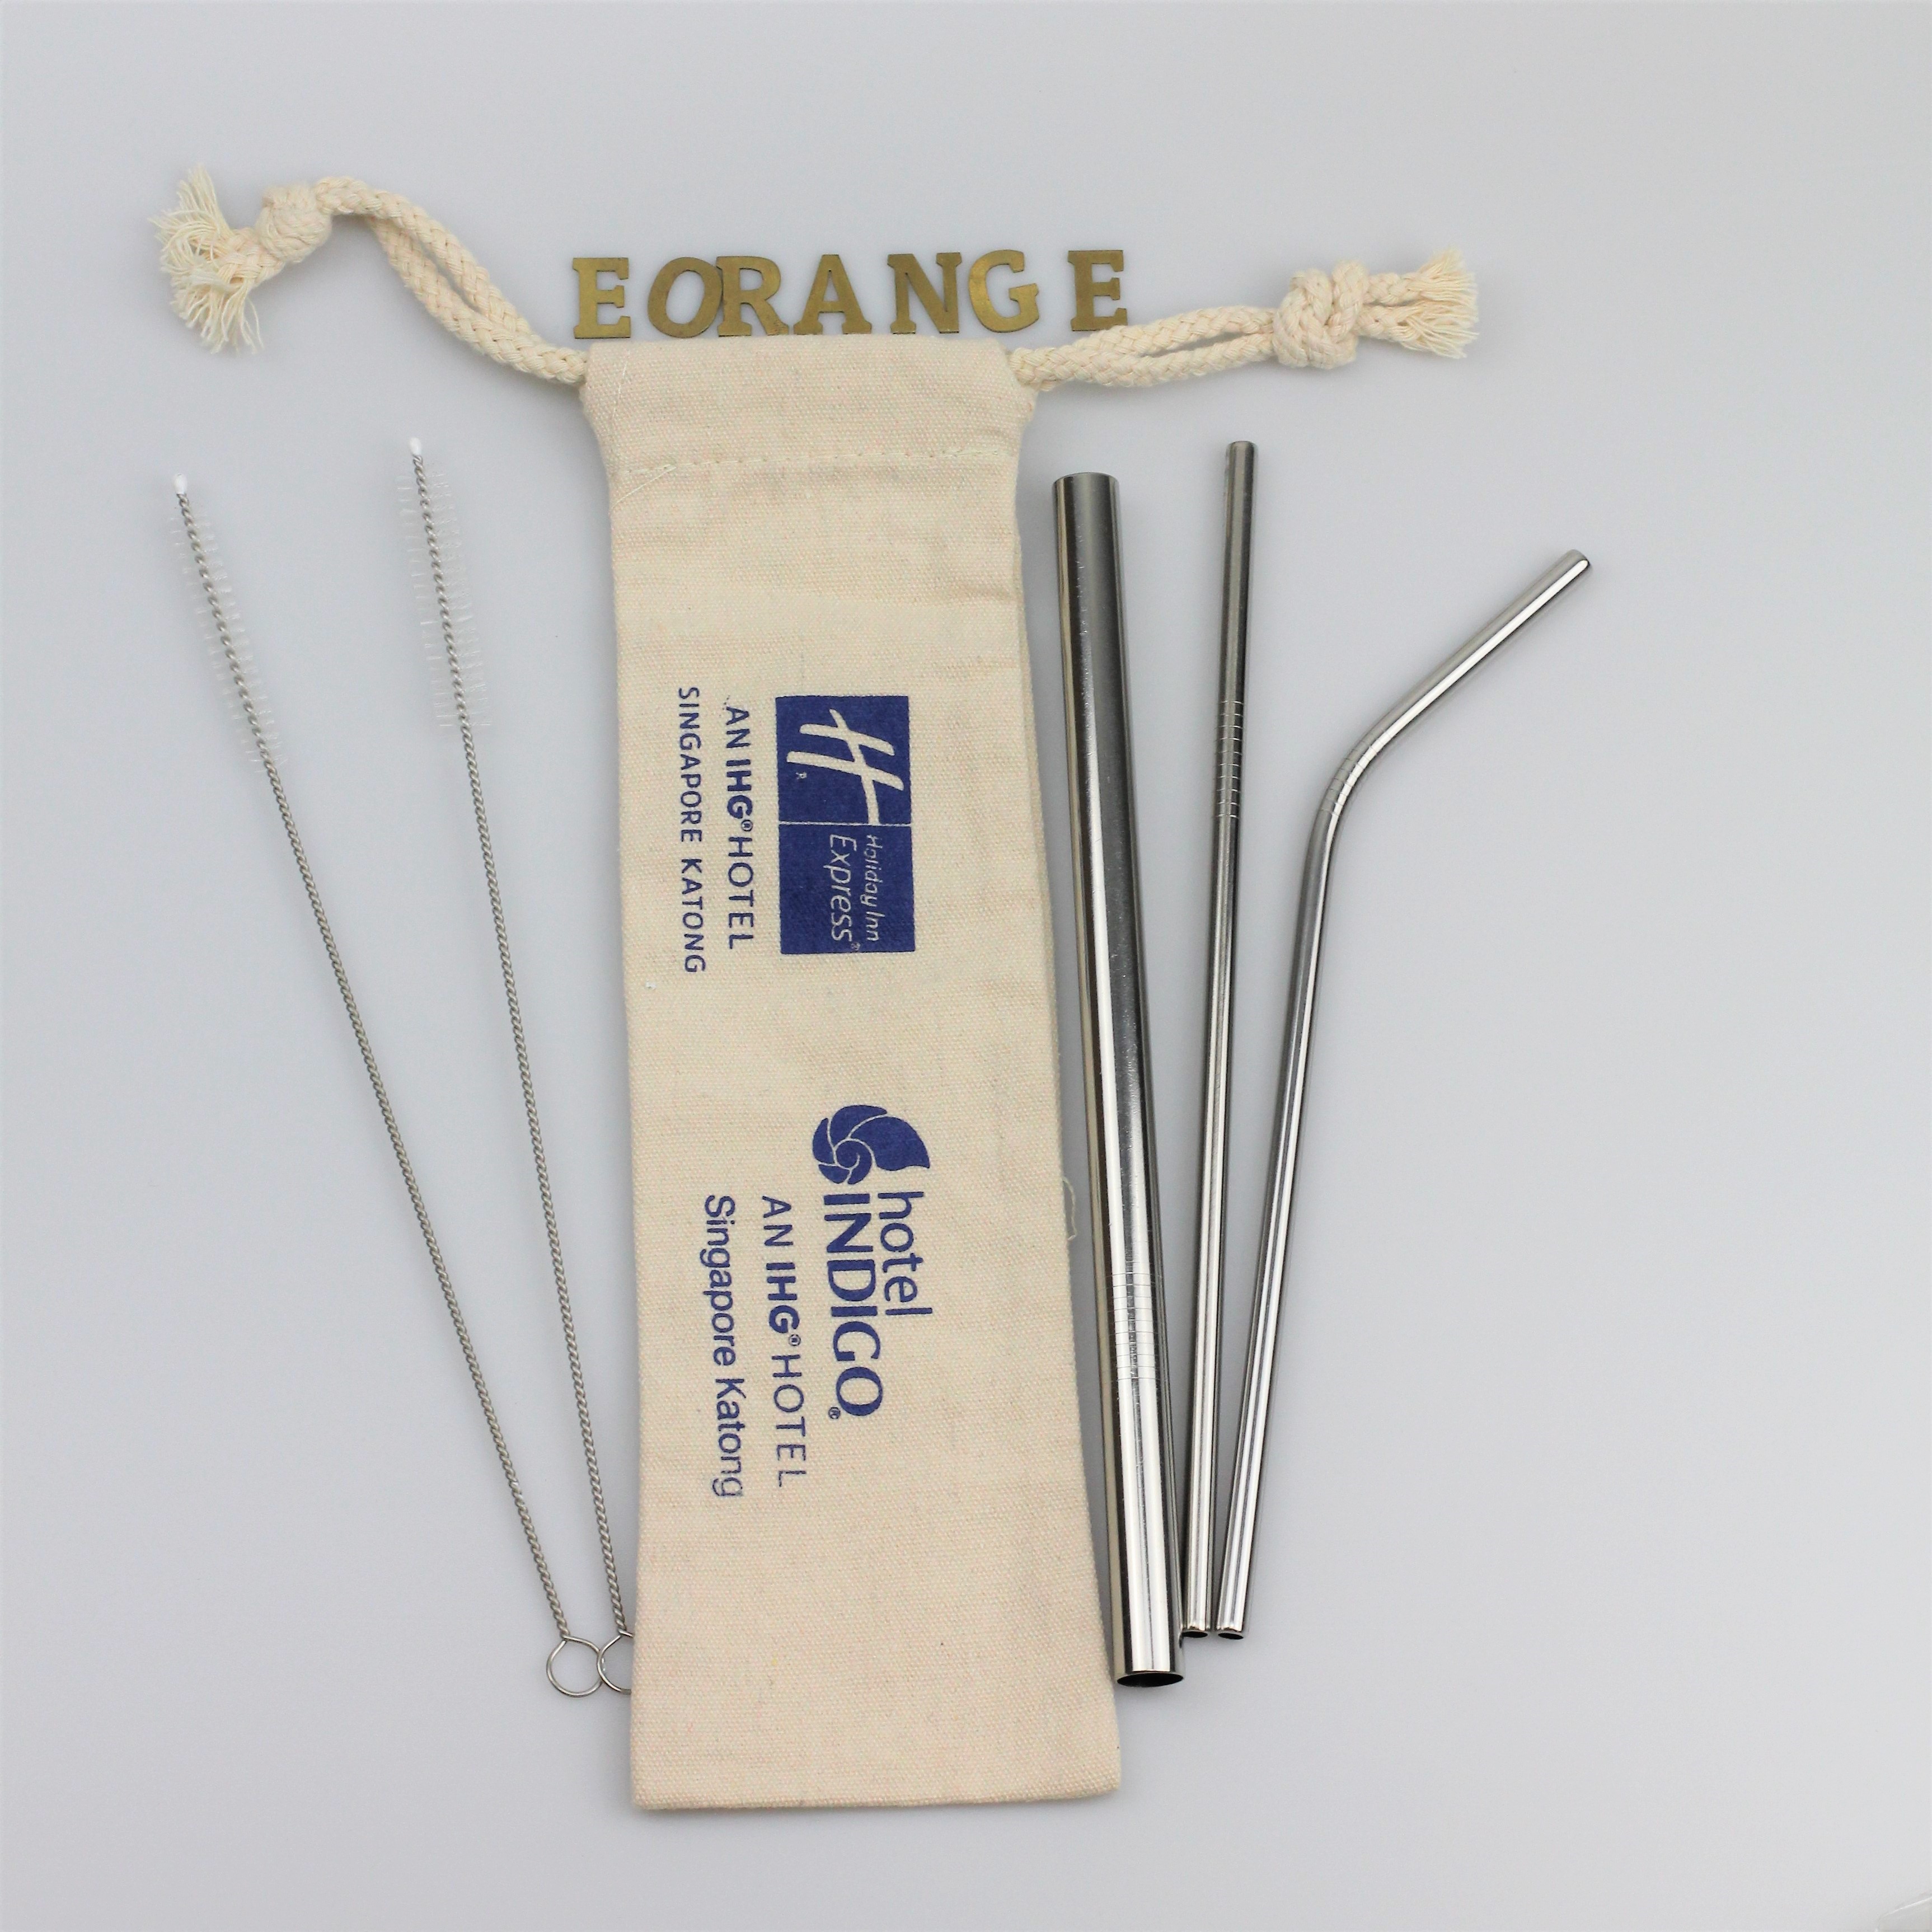 Reusable Stainless Steel Metal Straw Set Customised logo laser printing on the straw canvas pouch Environmentally friendly